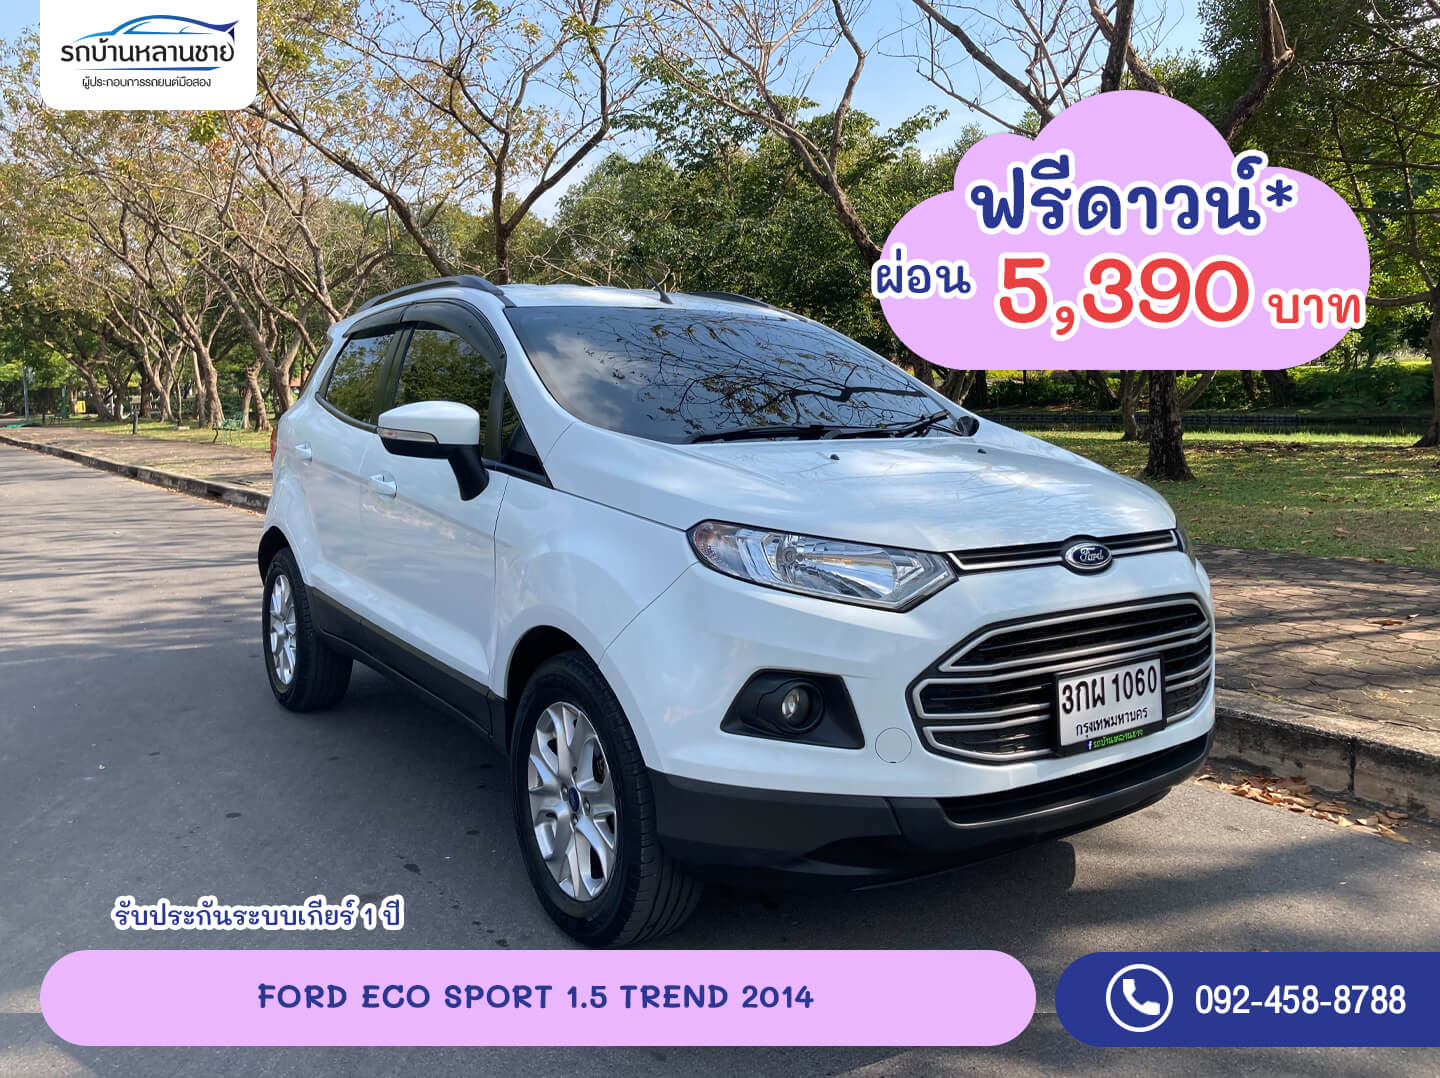 FORD ECO SPORT 1.5 TREND 2014